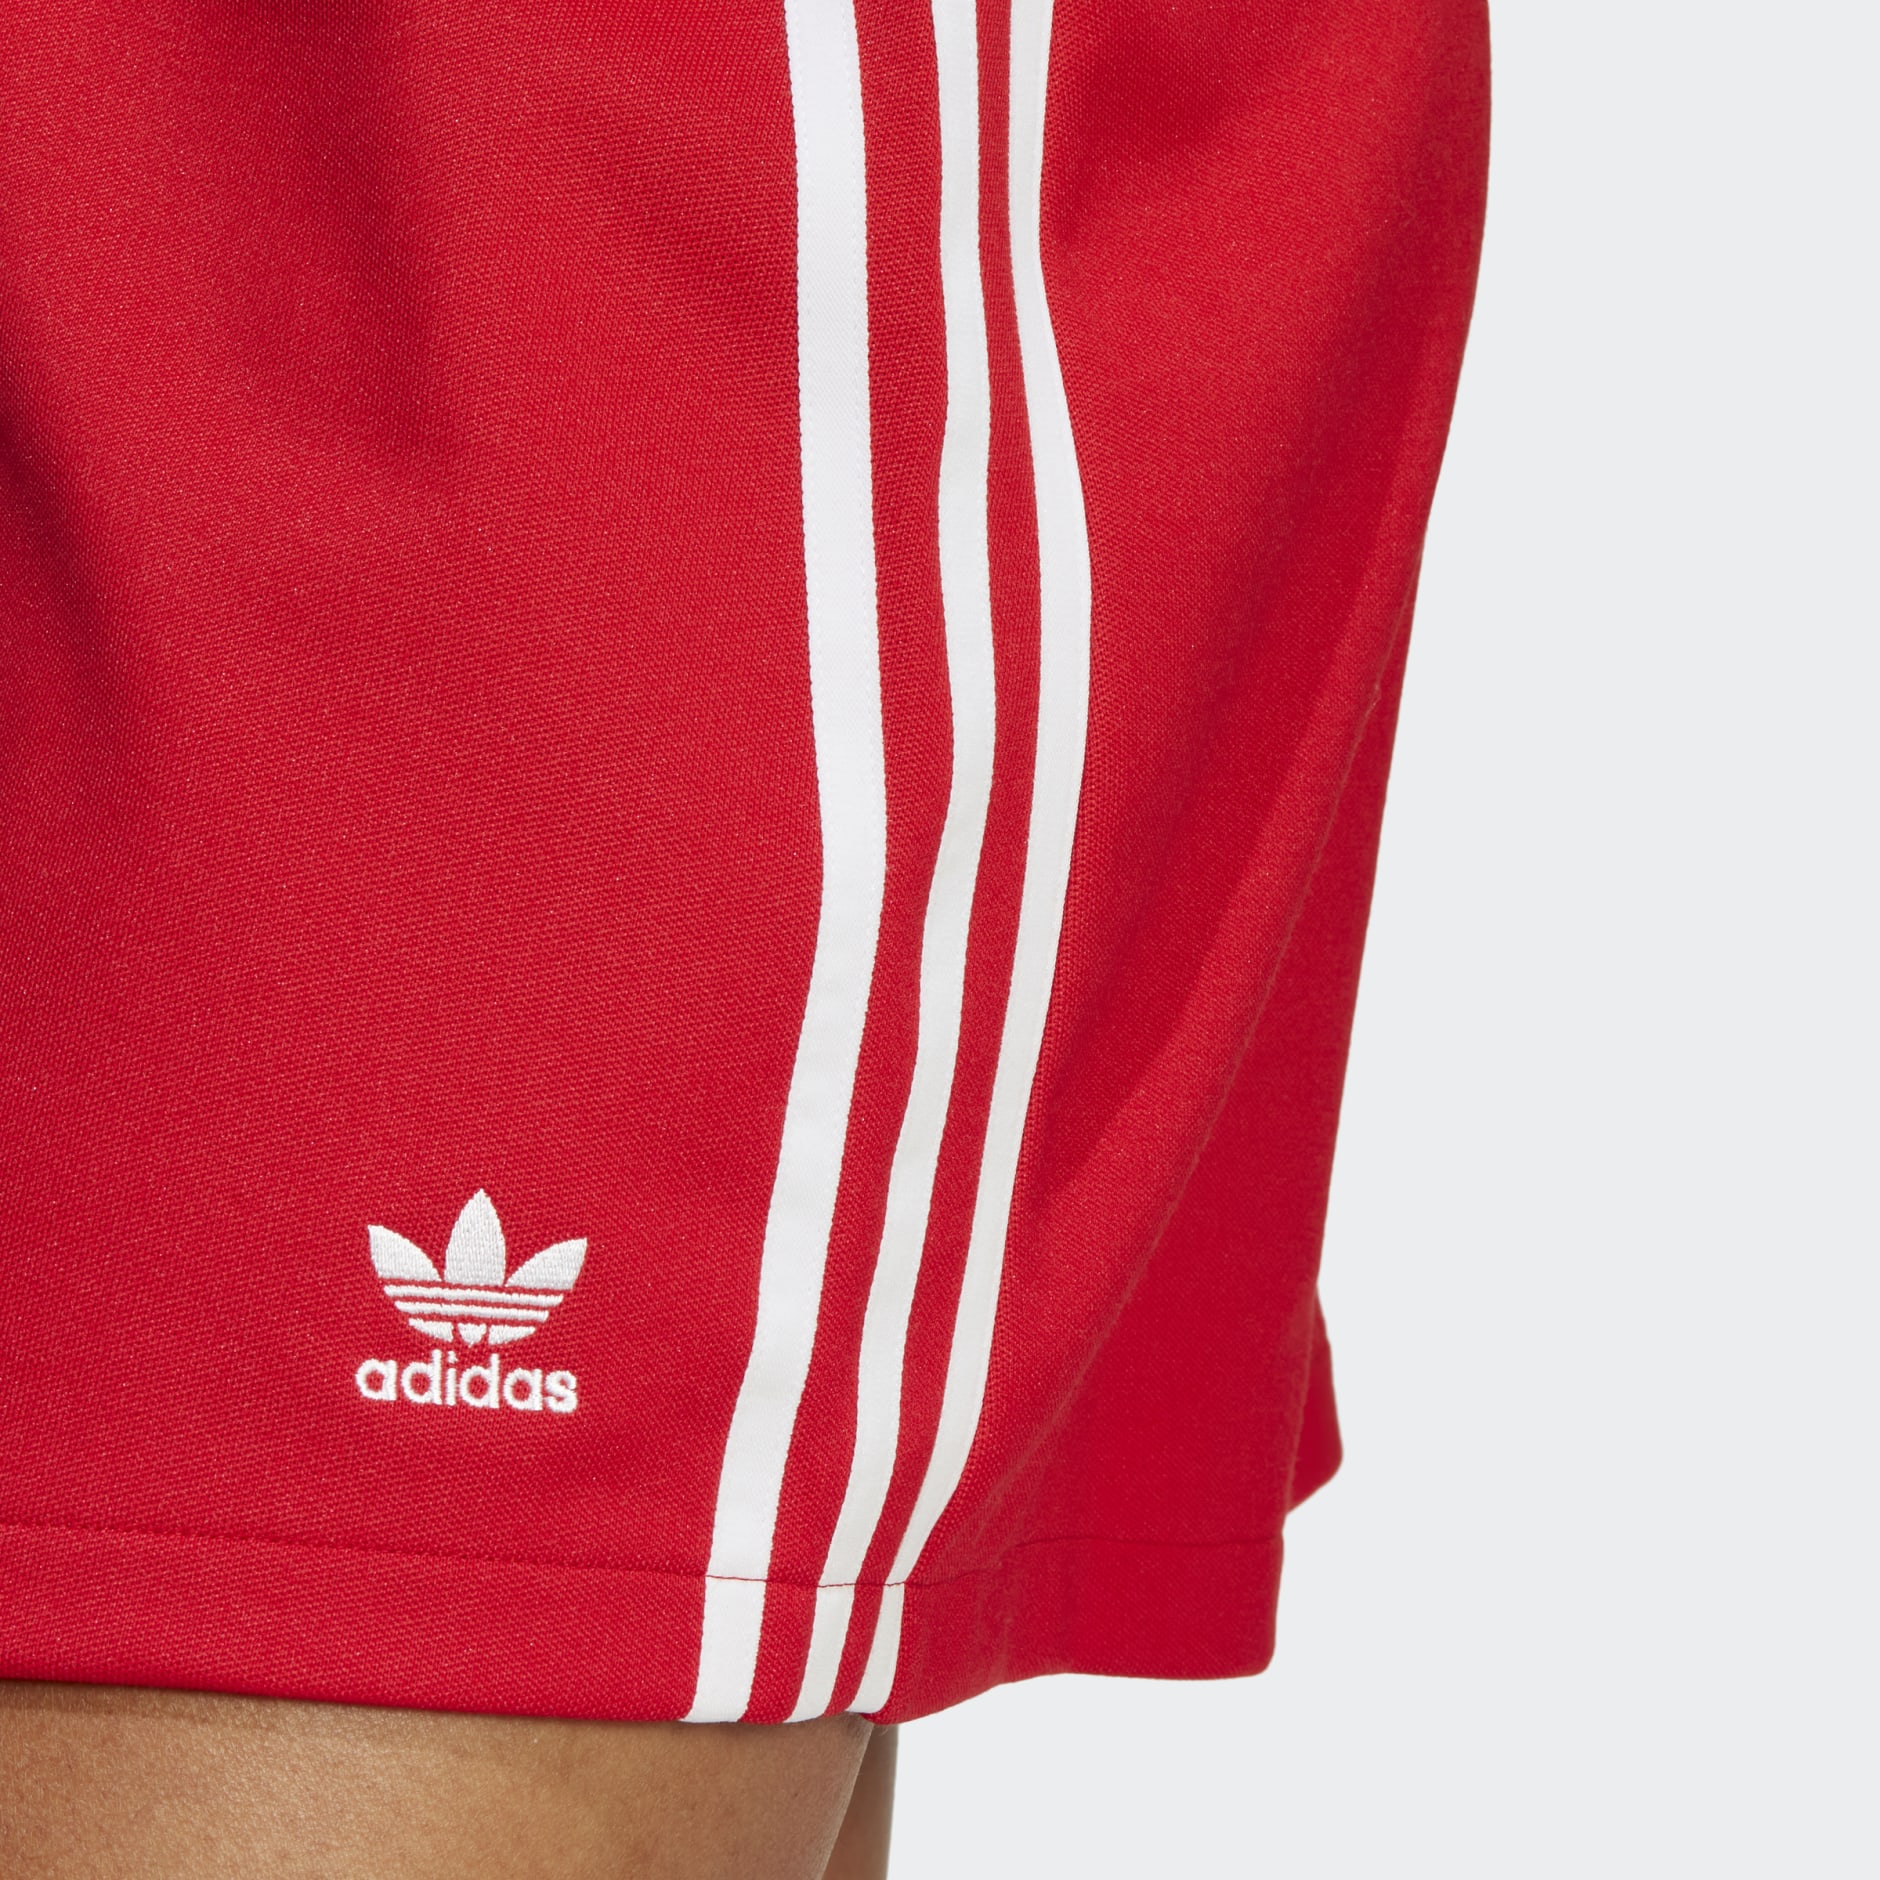 adidas Adicolor Classics 3-Stripes Short Wrapping Skirt - Red | adidas GH